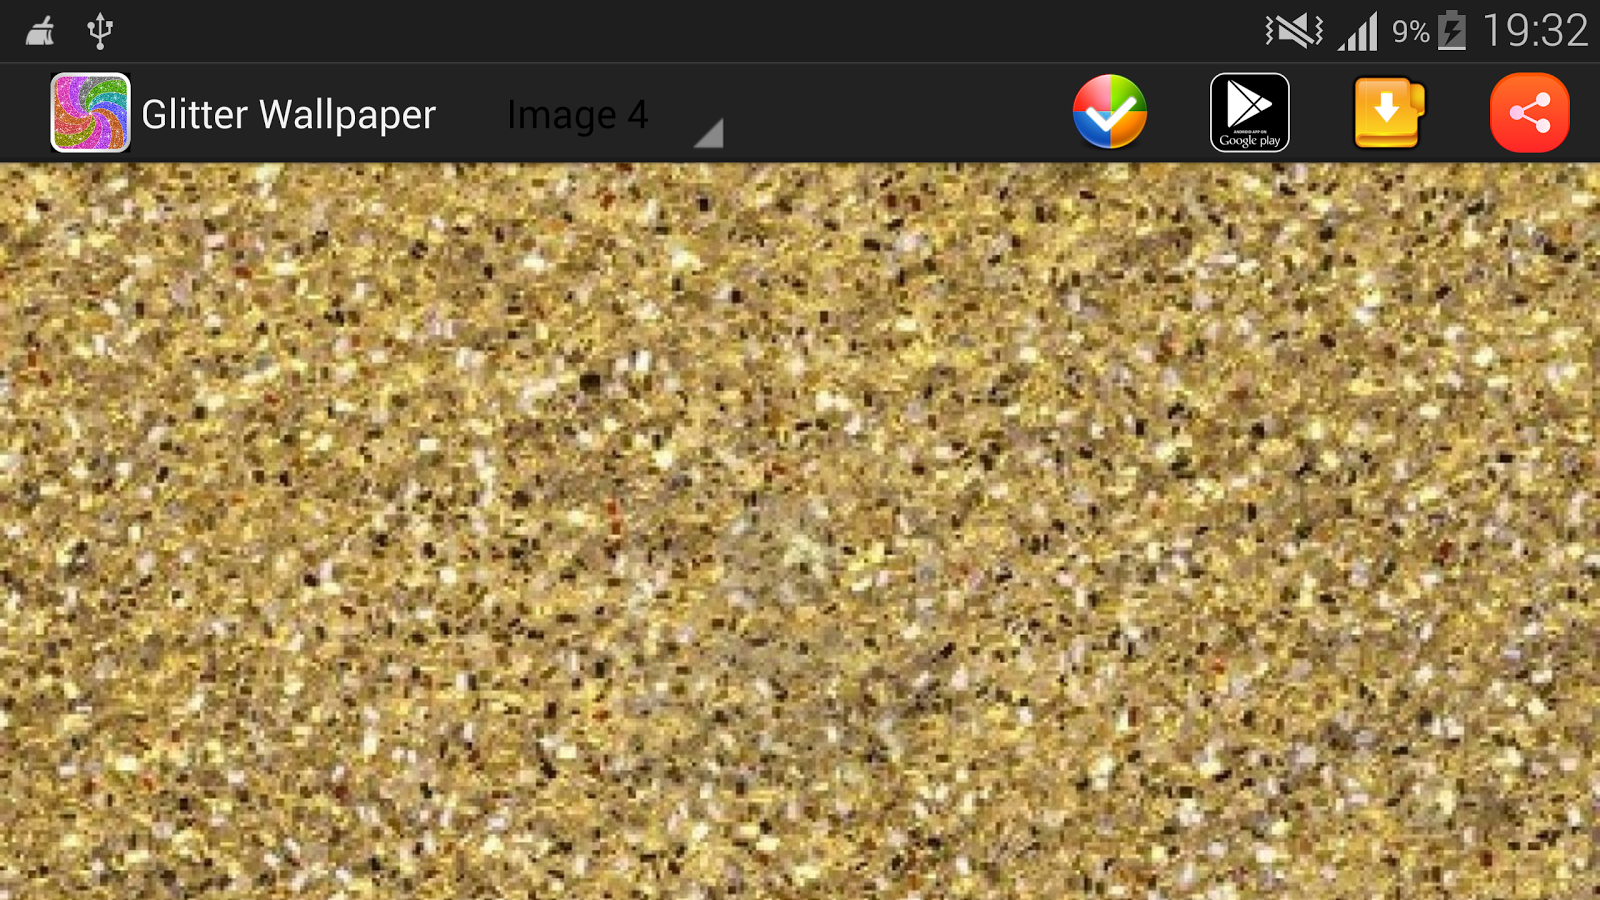 Glitter Wallpapers Android Apps On Google Play